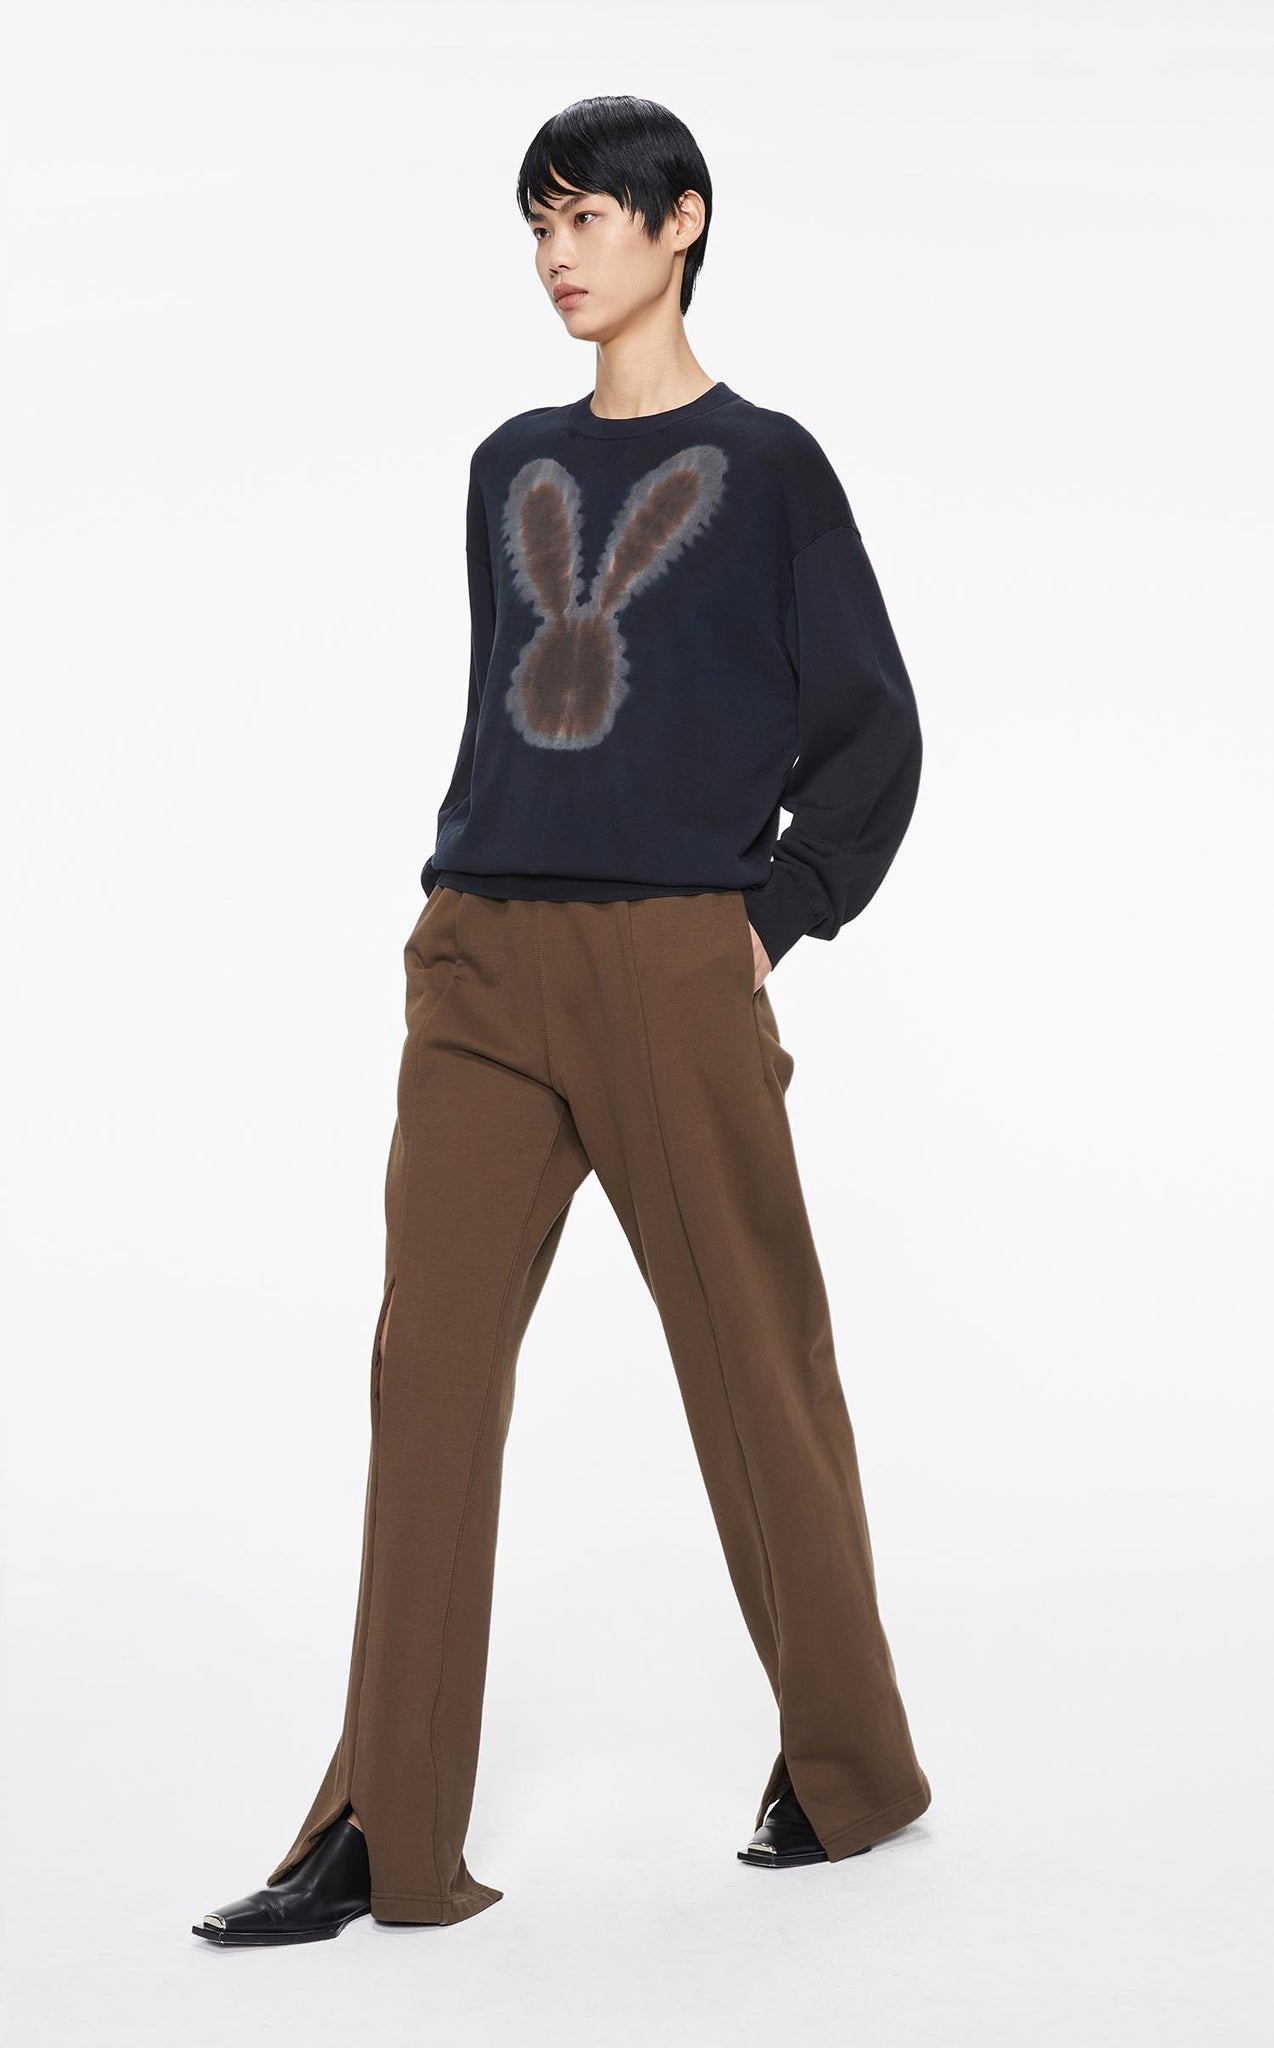 Sweater / JNBY Crewneck Print Bunny Pullover (100% Cotton)